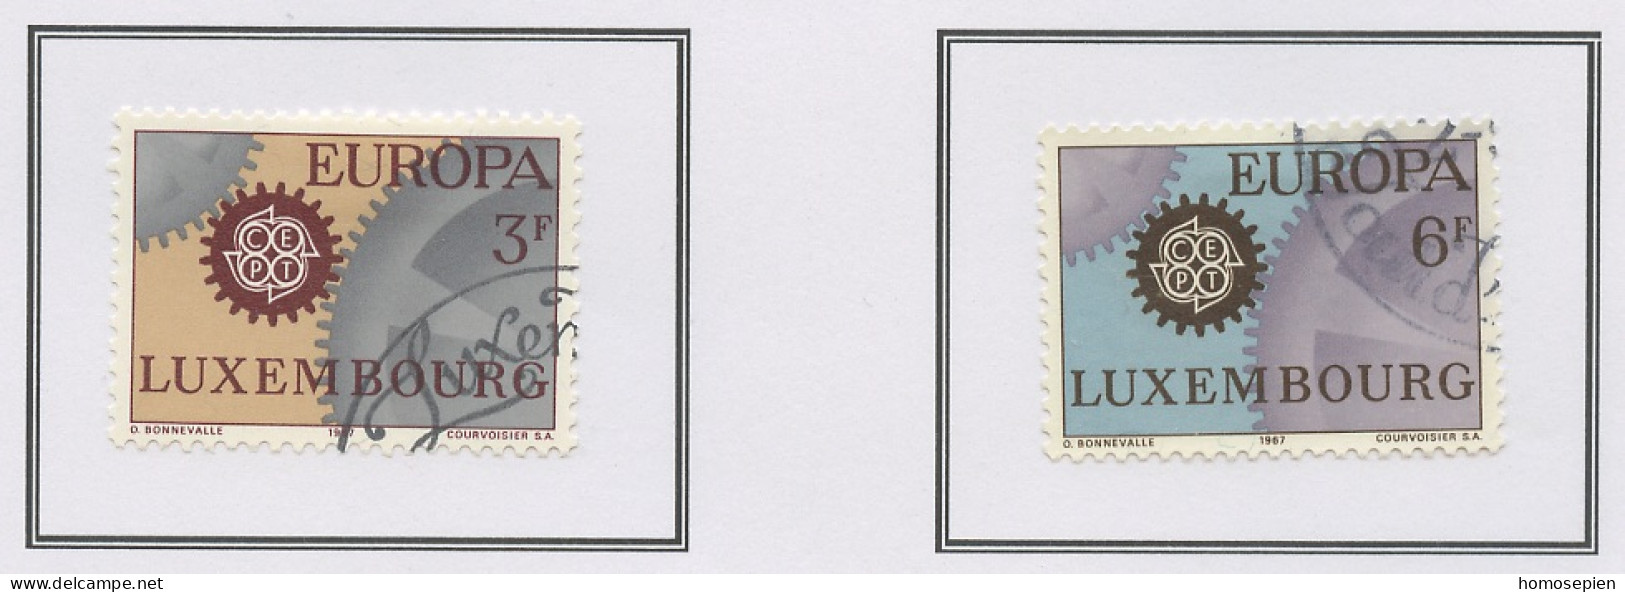 Luxembourg - Luxemburg 1967 Y&T N°700 à 701 - Michel N°748 à 749 (o) - EUROPA - Used Stamps